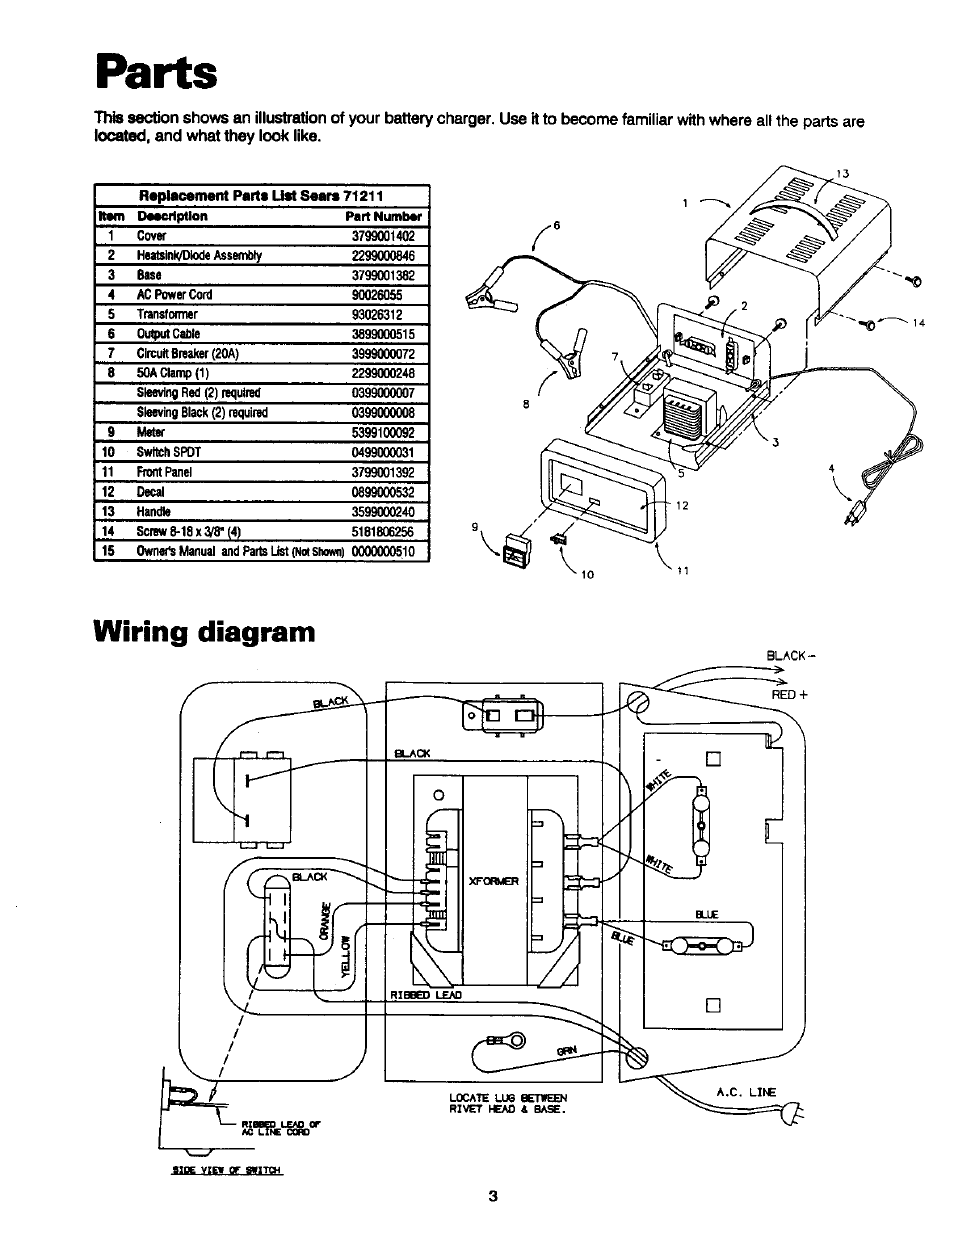 Parts, Wiring diagram | Sears 200.71211 User Manual | Page 4 / 12